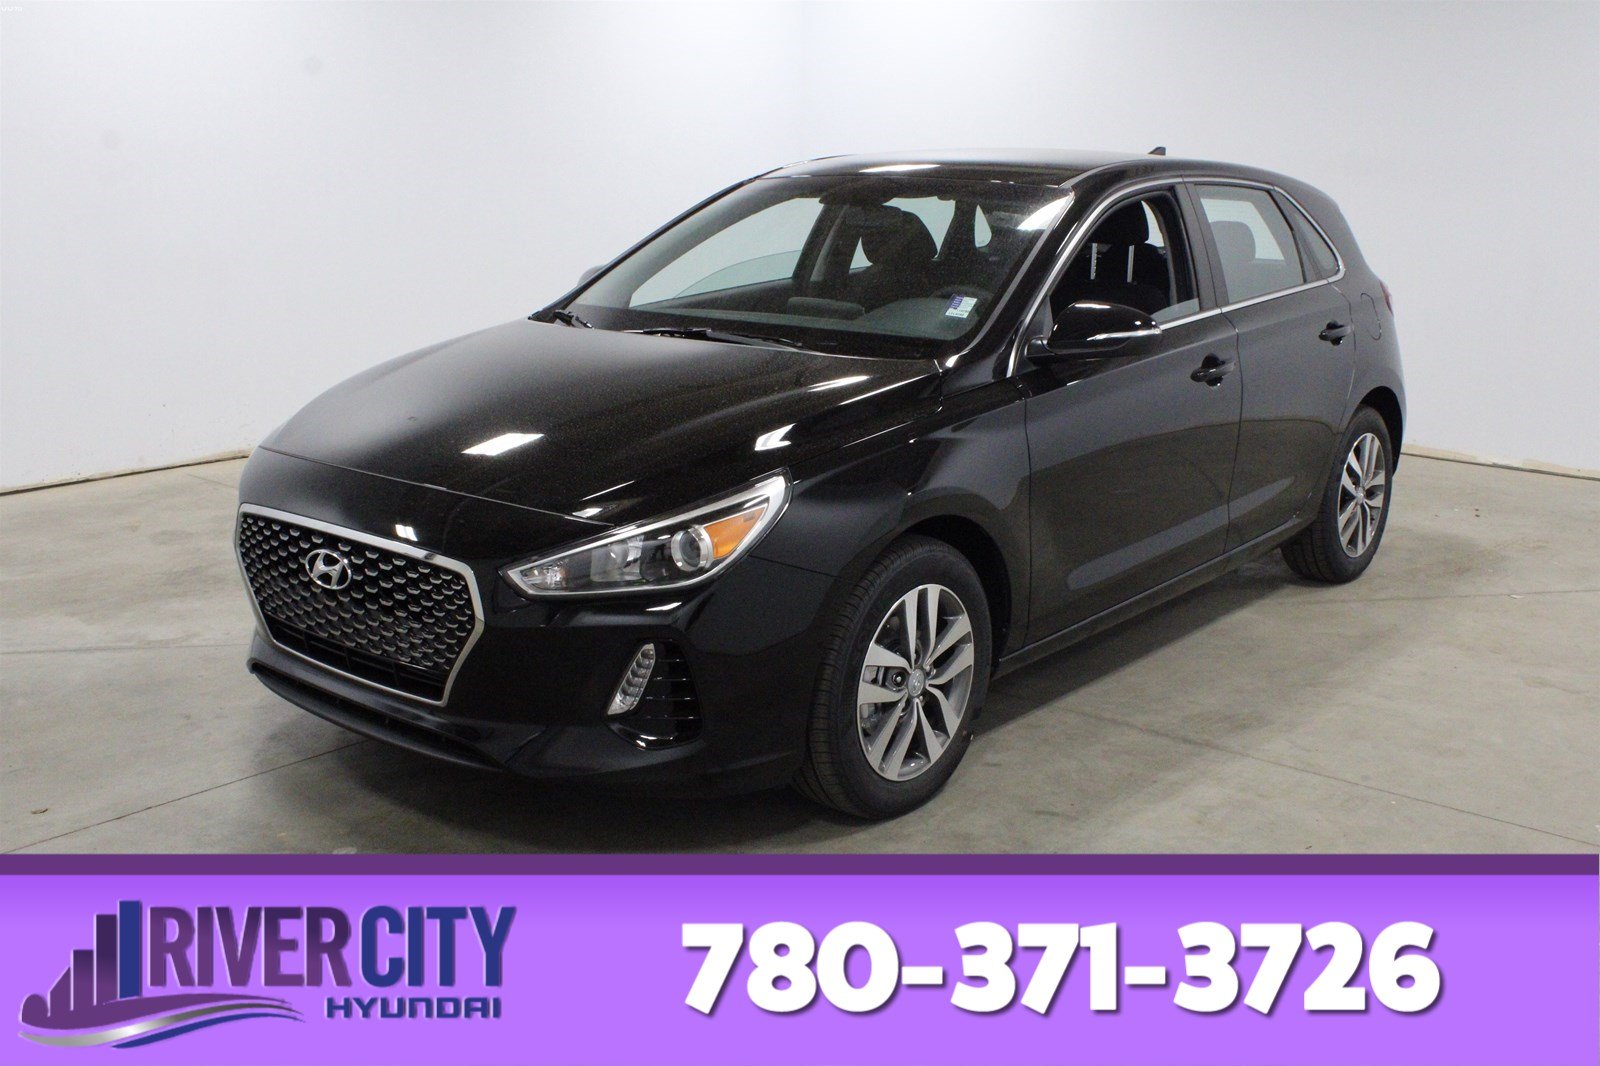 New 2020 Hyundai Elantra Gt Preferred Heated Steering Wheel Heated Front Seats Bluetooth Touch Screen